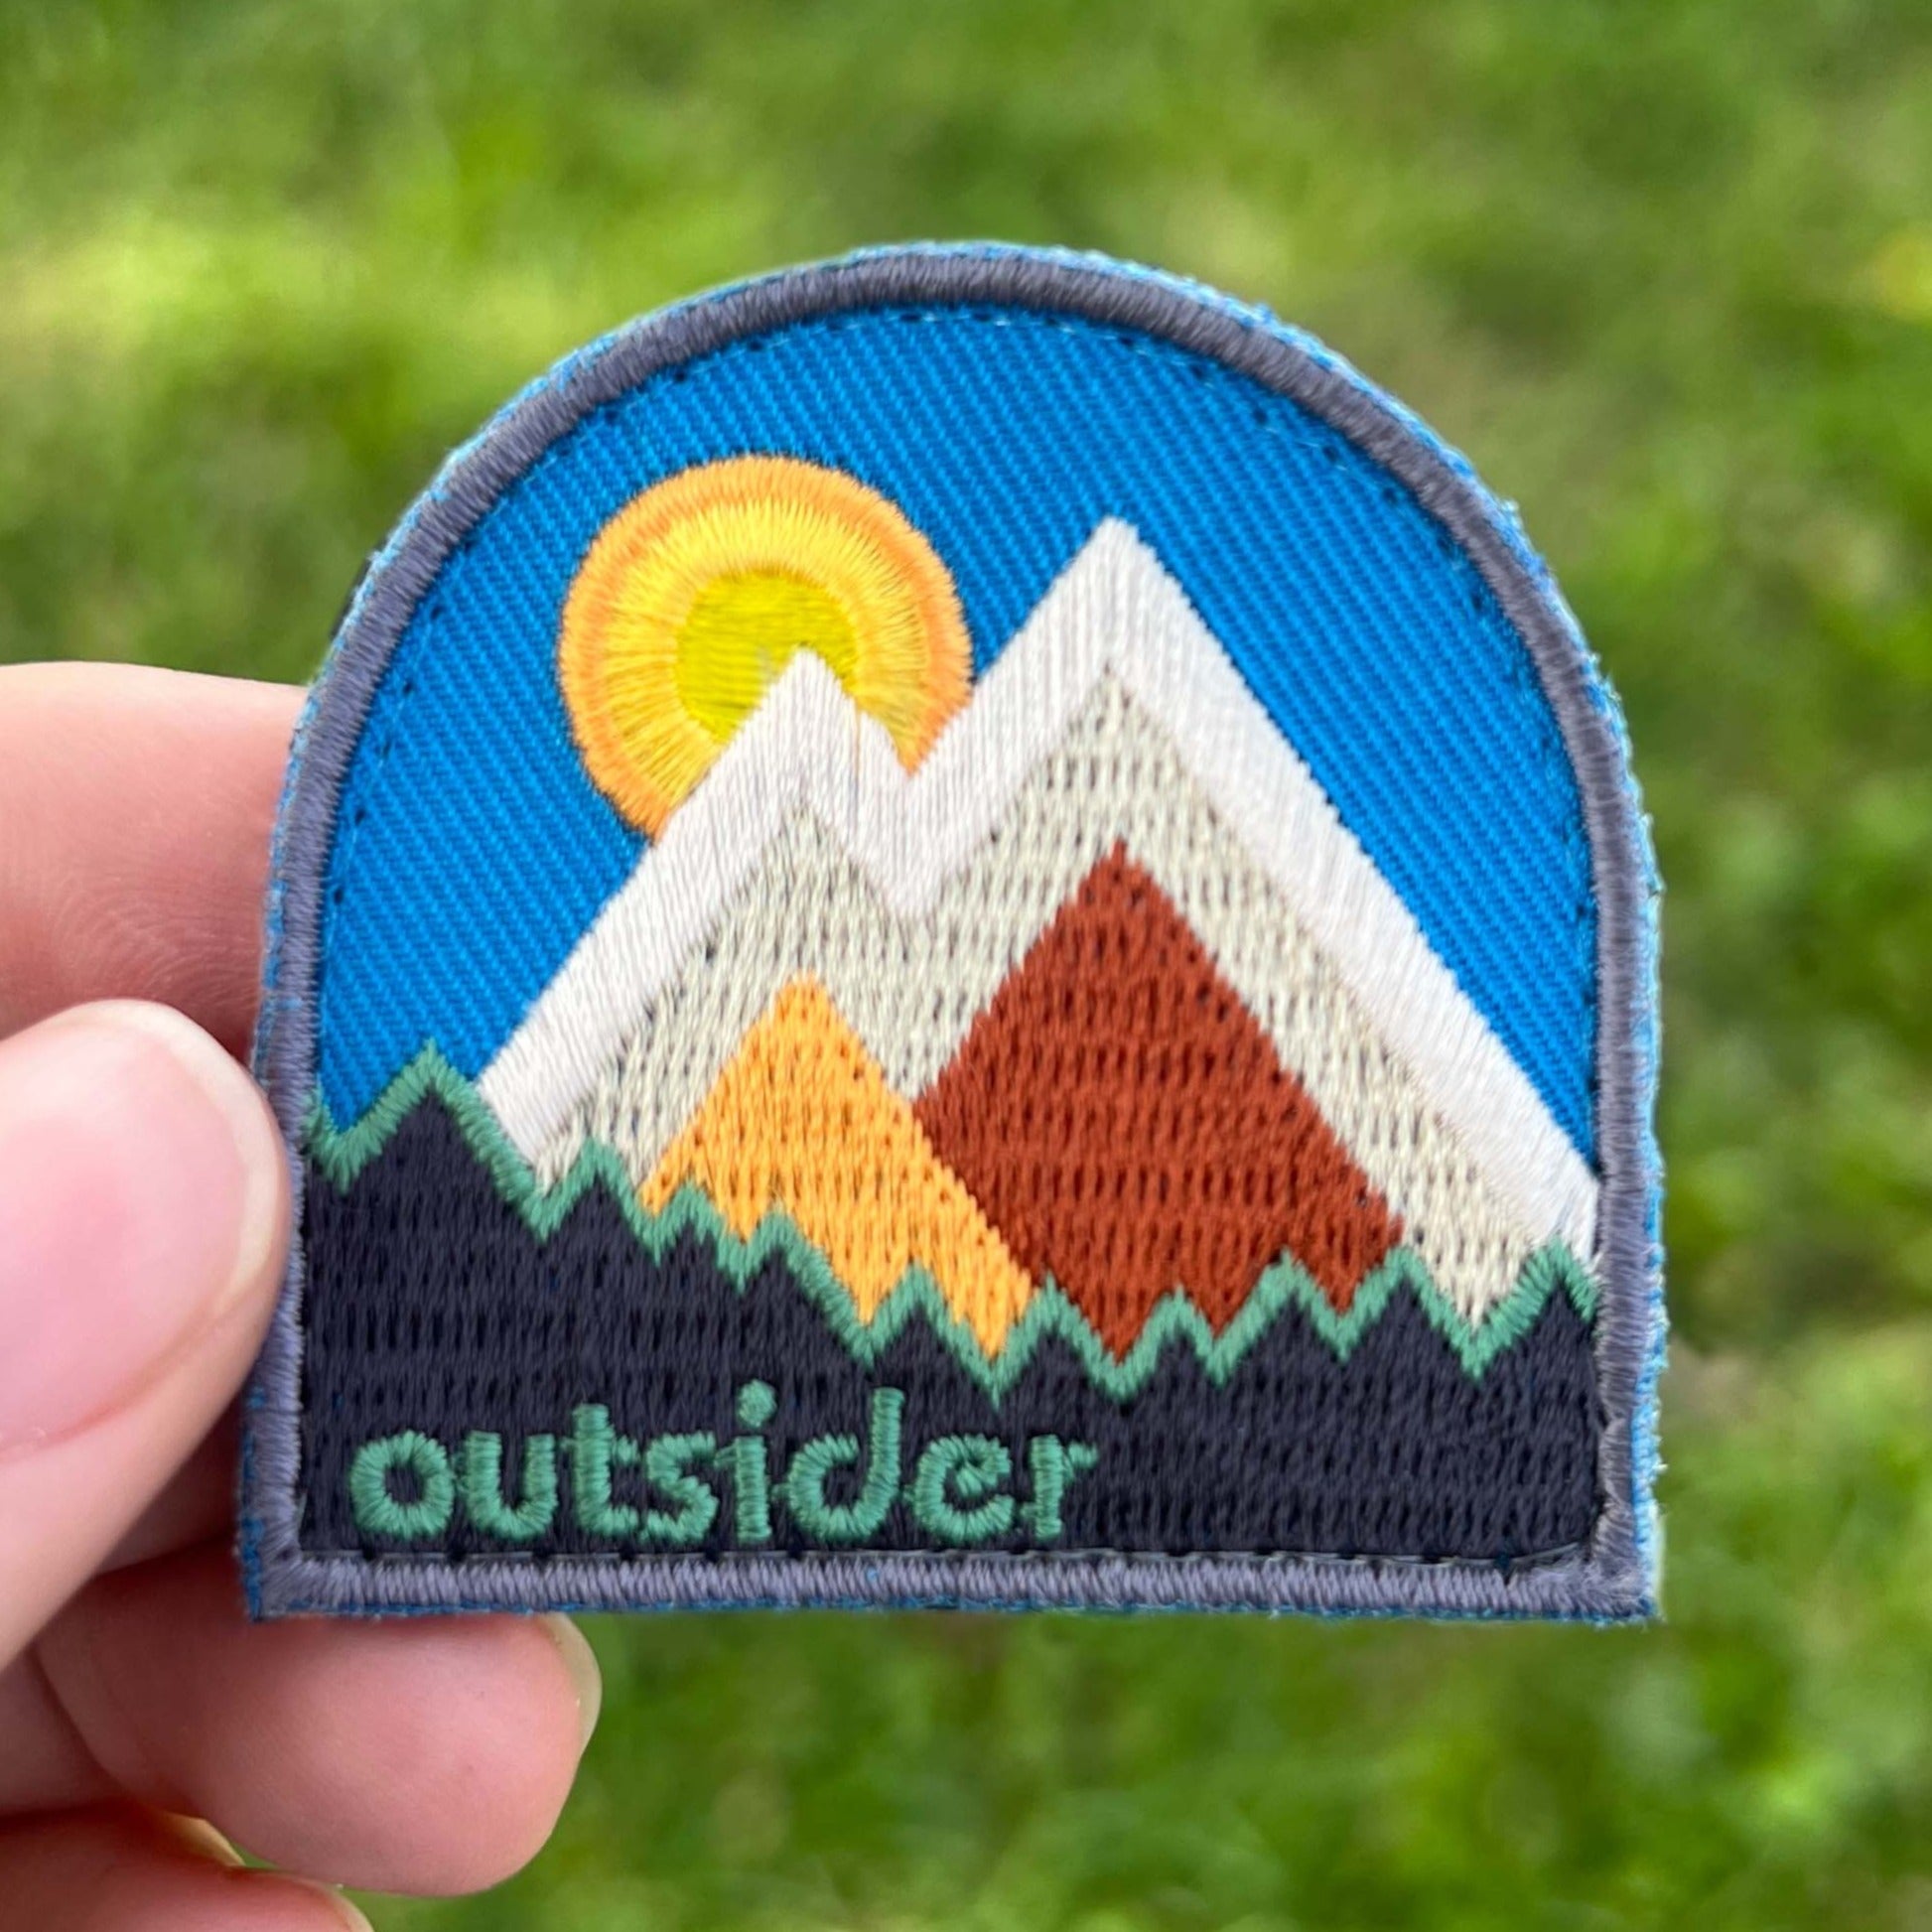 Outsider Swappable™ Patch